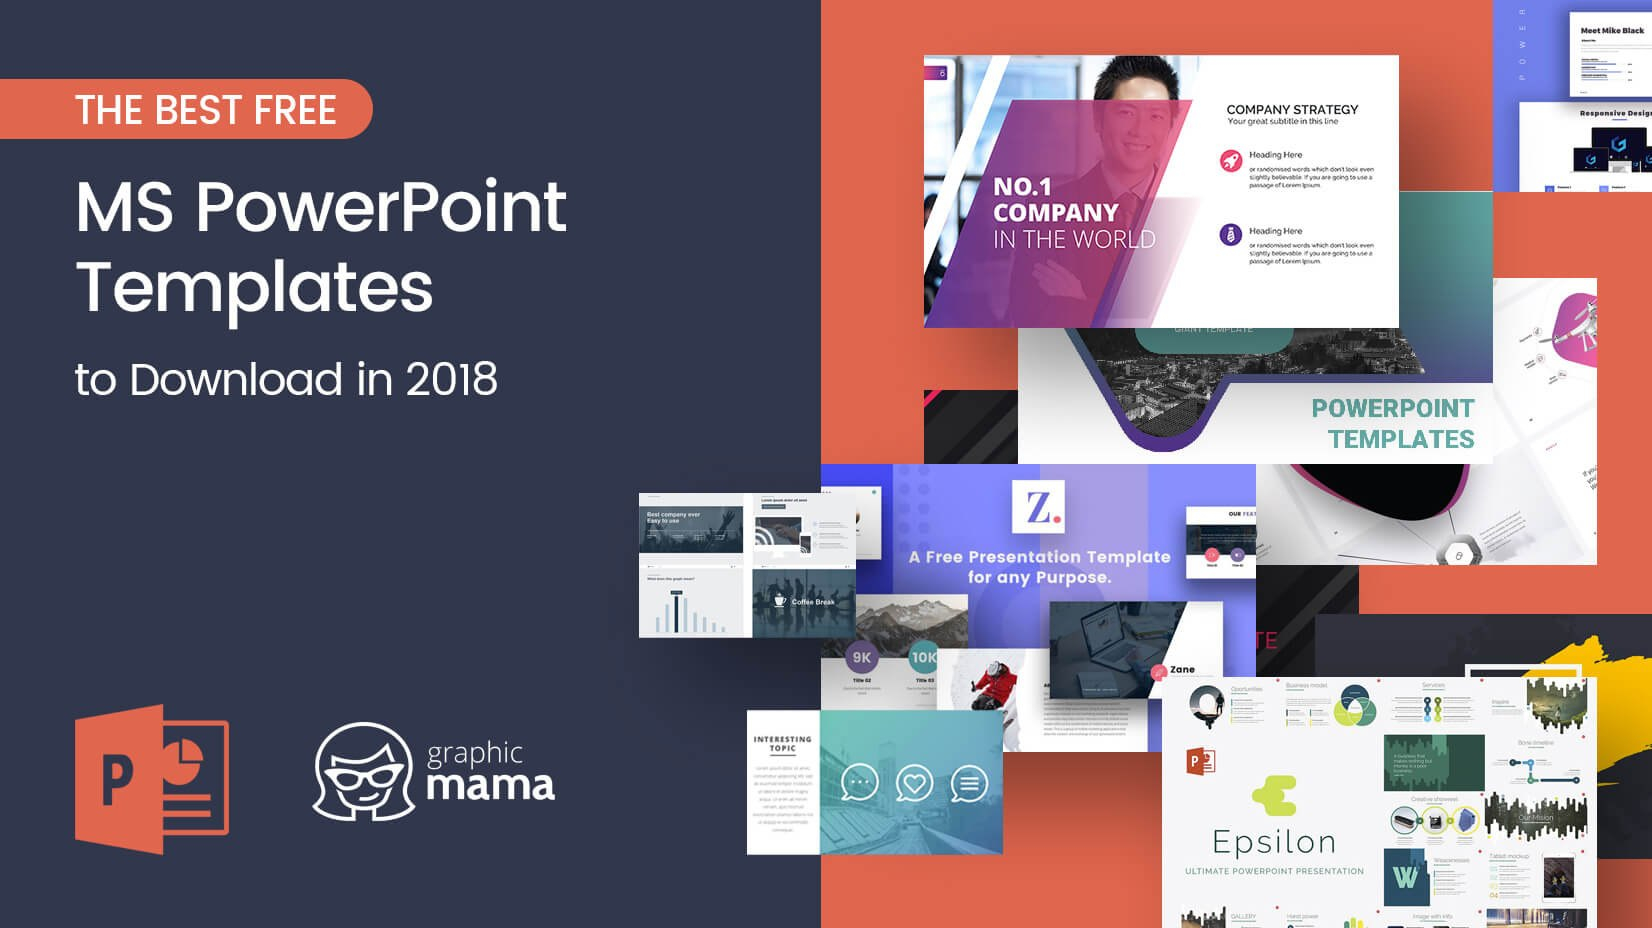 The Best Free Powerpoint Templates To Download In   Graphicmama with regard to Free Powerpoint Presentation Templates Downloads